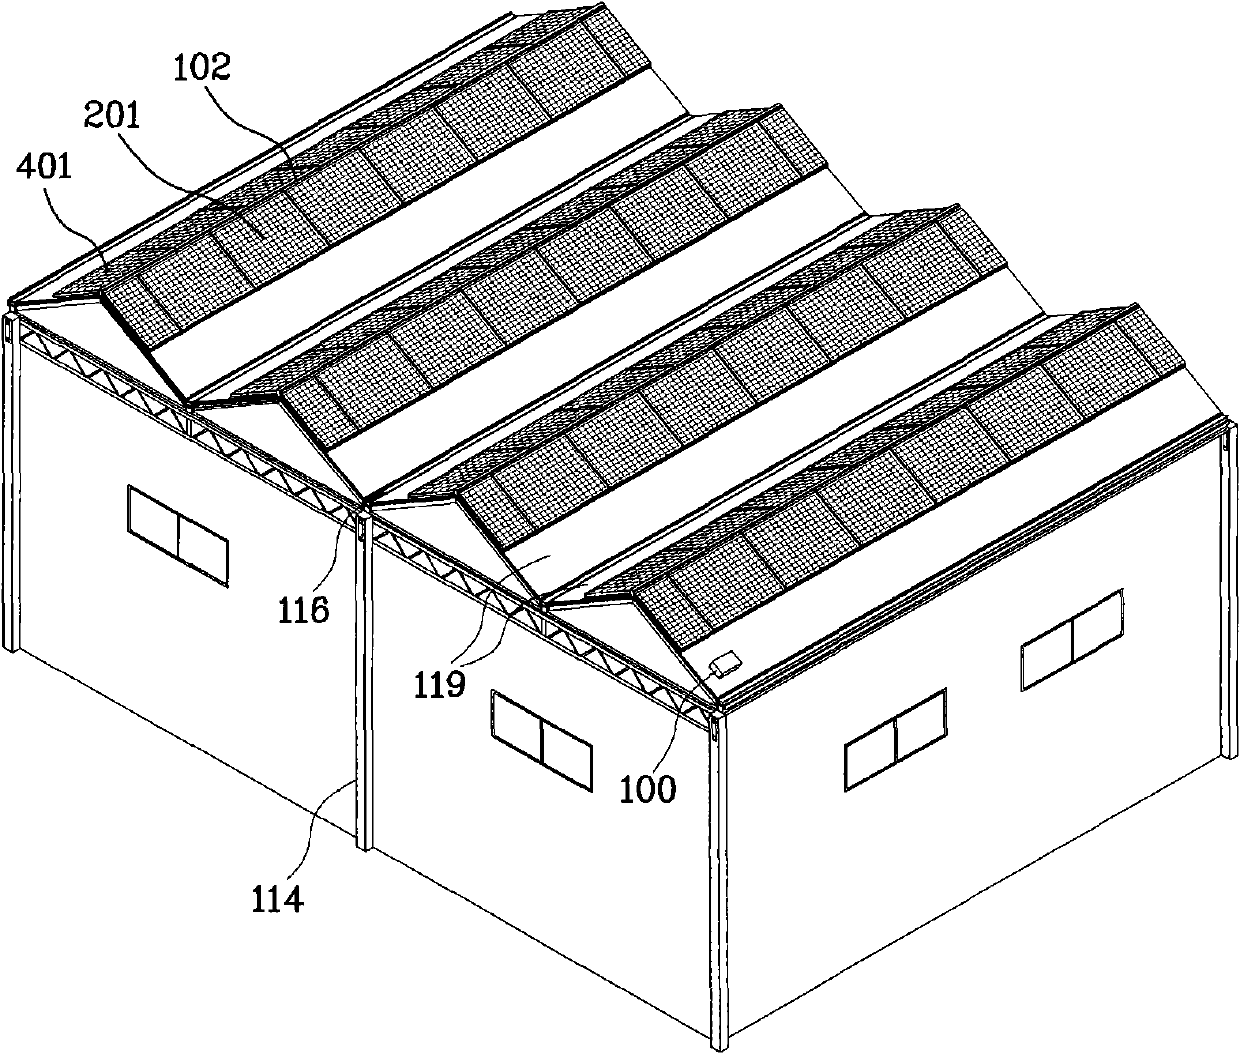 Apparatus for two-way tracing and concentrating sunlight of roof installation type